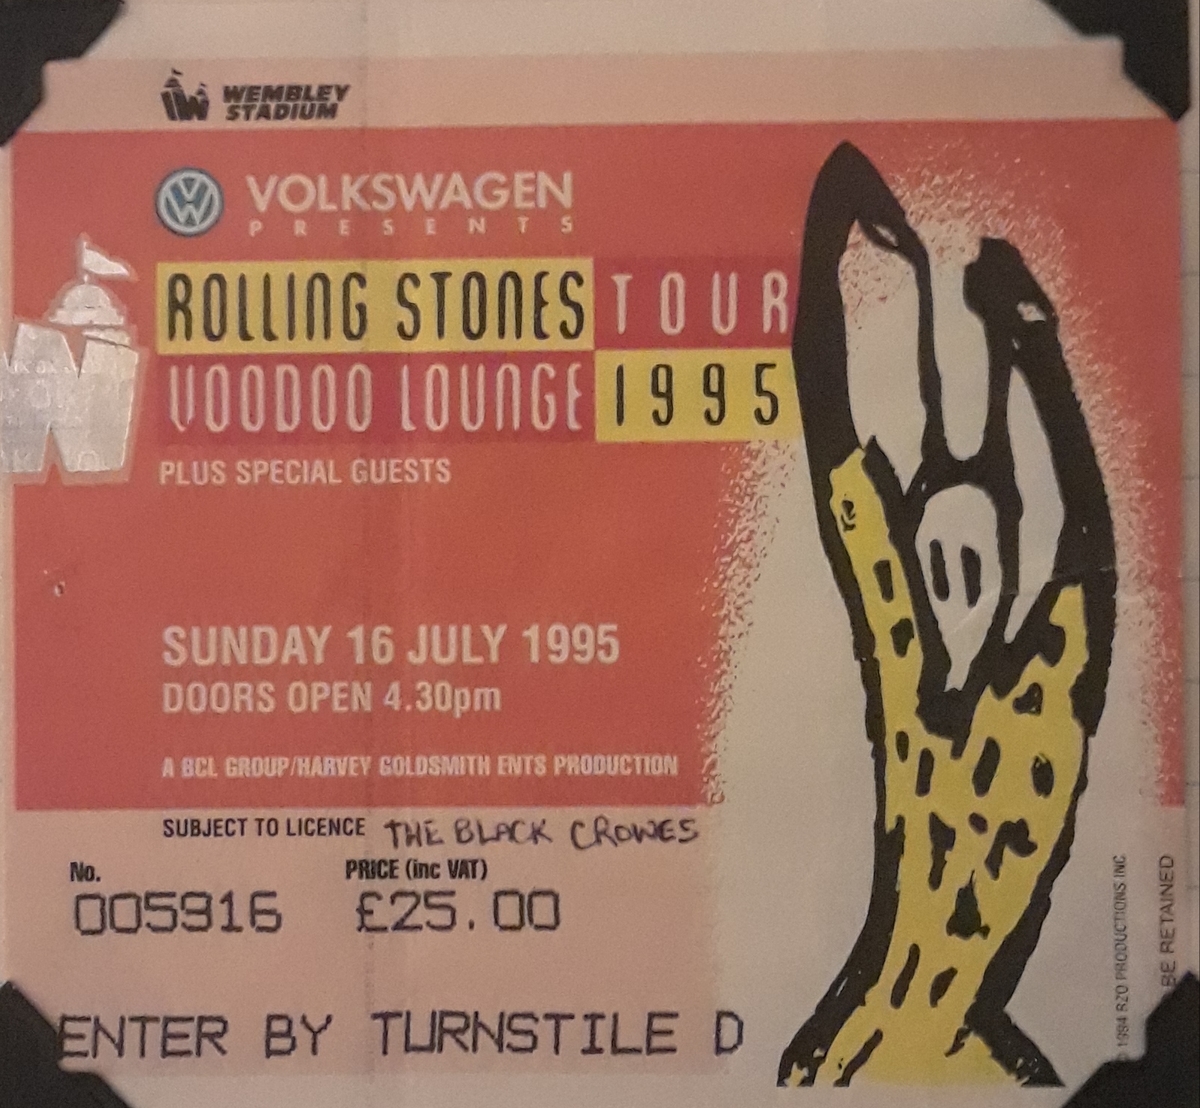 Jul 16, 1995: The Rolling Stones / The Black Crowes at Wembley Stadium  Wembley, England, United Kingdom | Concert Archives